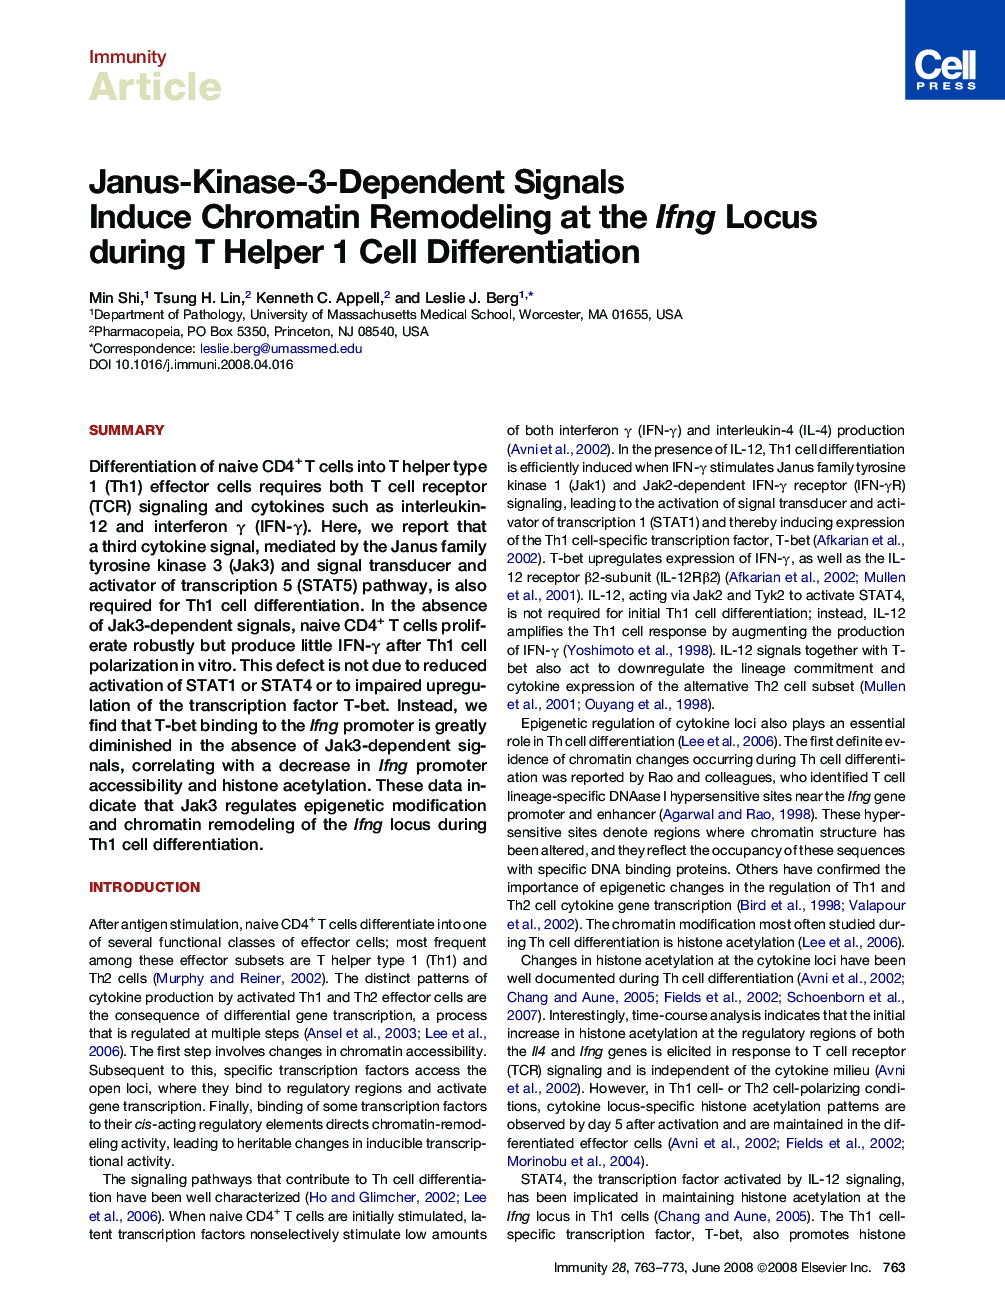 Janus-Kinase-3-Dependent Signals Induce Chromatin Remodeling at the Ifng Locus during T Helper 1 Cell Differentiation